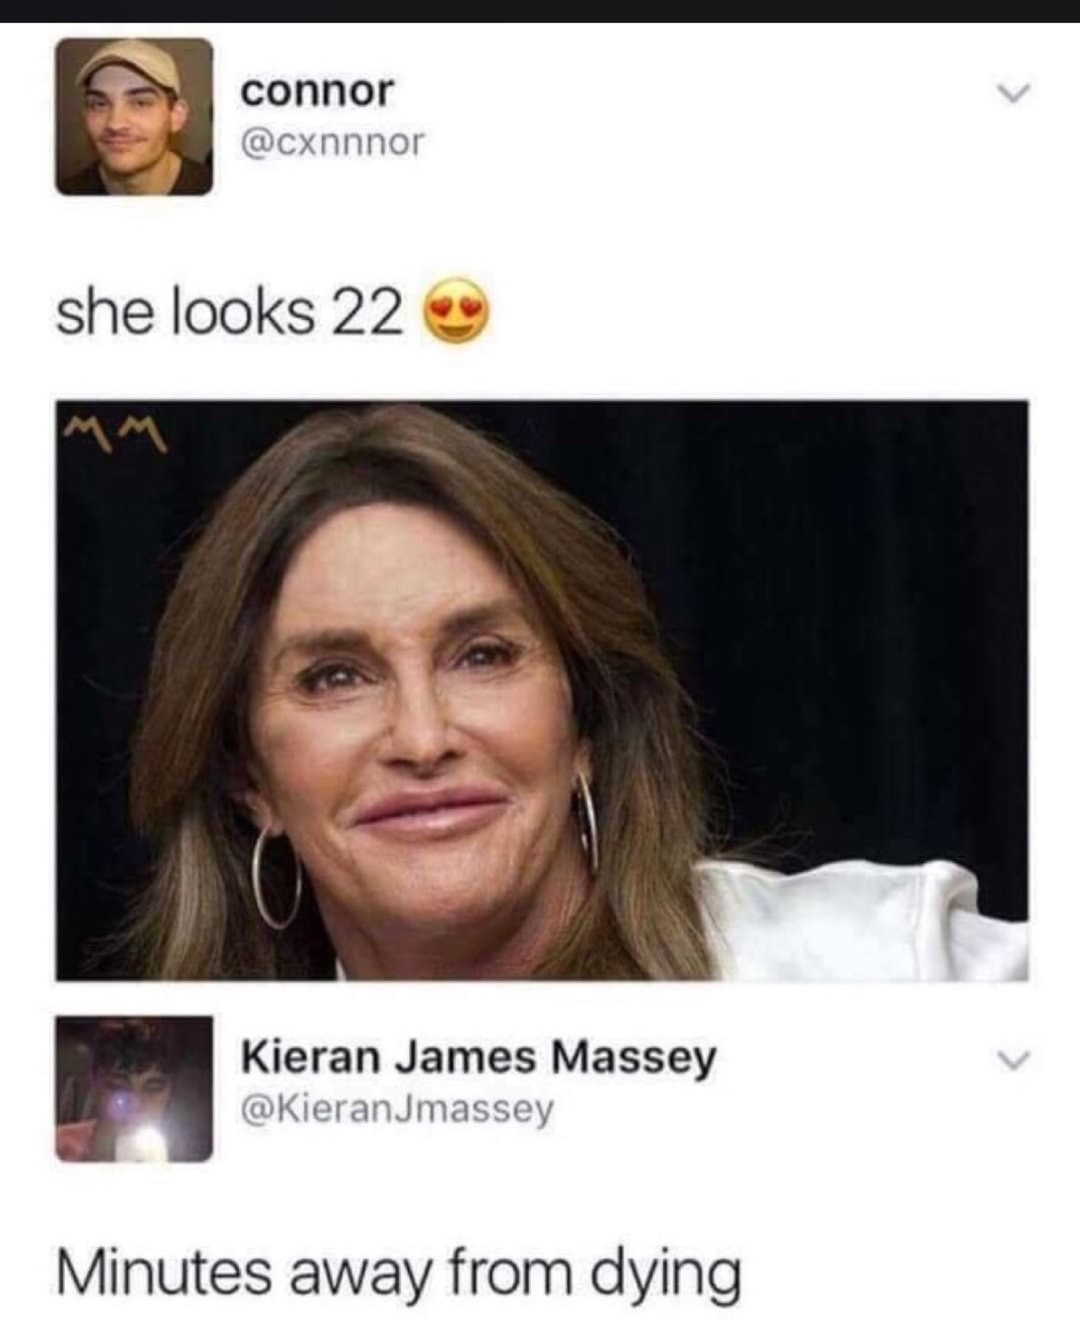 caitlyn jenner meme she looks 22 - connor she looks 22 Kieran James Massey Minutes away from dying